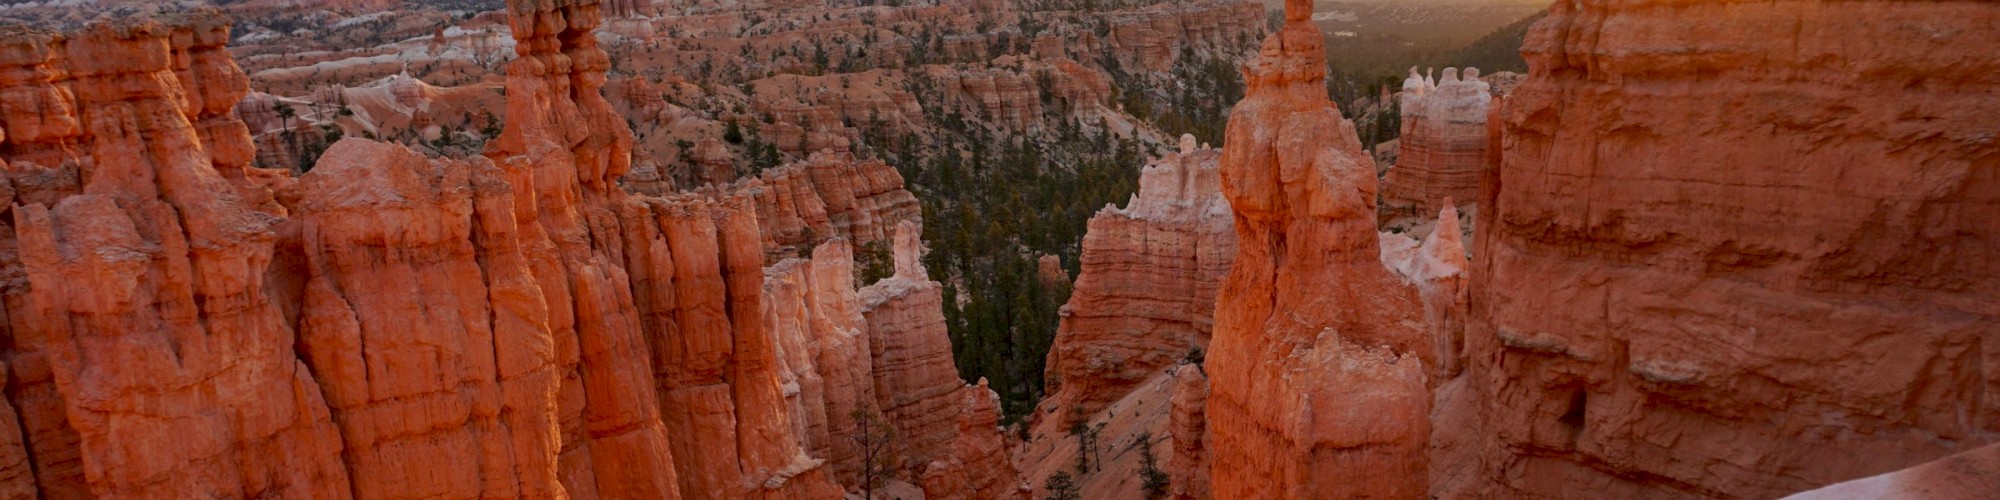 A stunning canyon landscape with tall, reddish rock formations at sunrise, showcasing the beauty of natural erosion and geological formations.